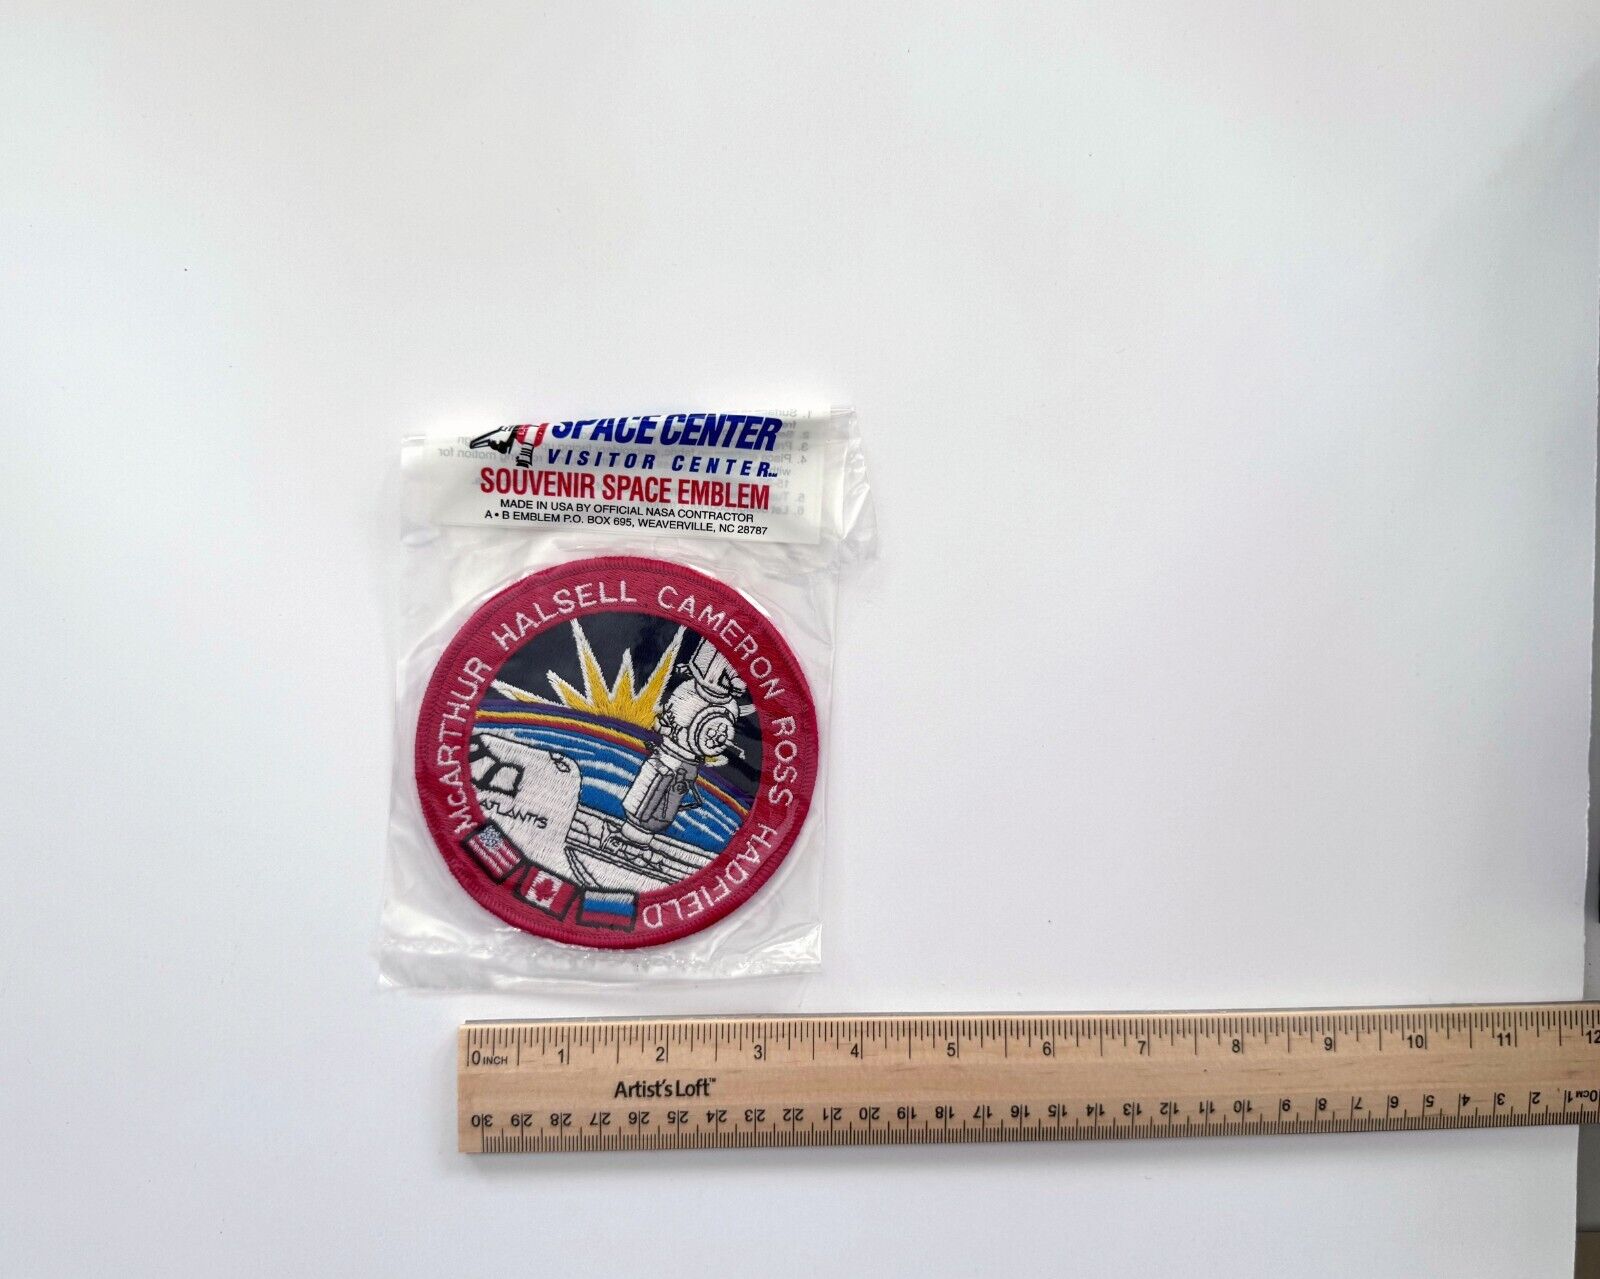 STS-63 DISCOVERY STS-63 SPACE SHUTTLE patch